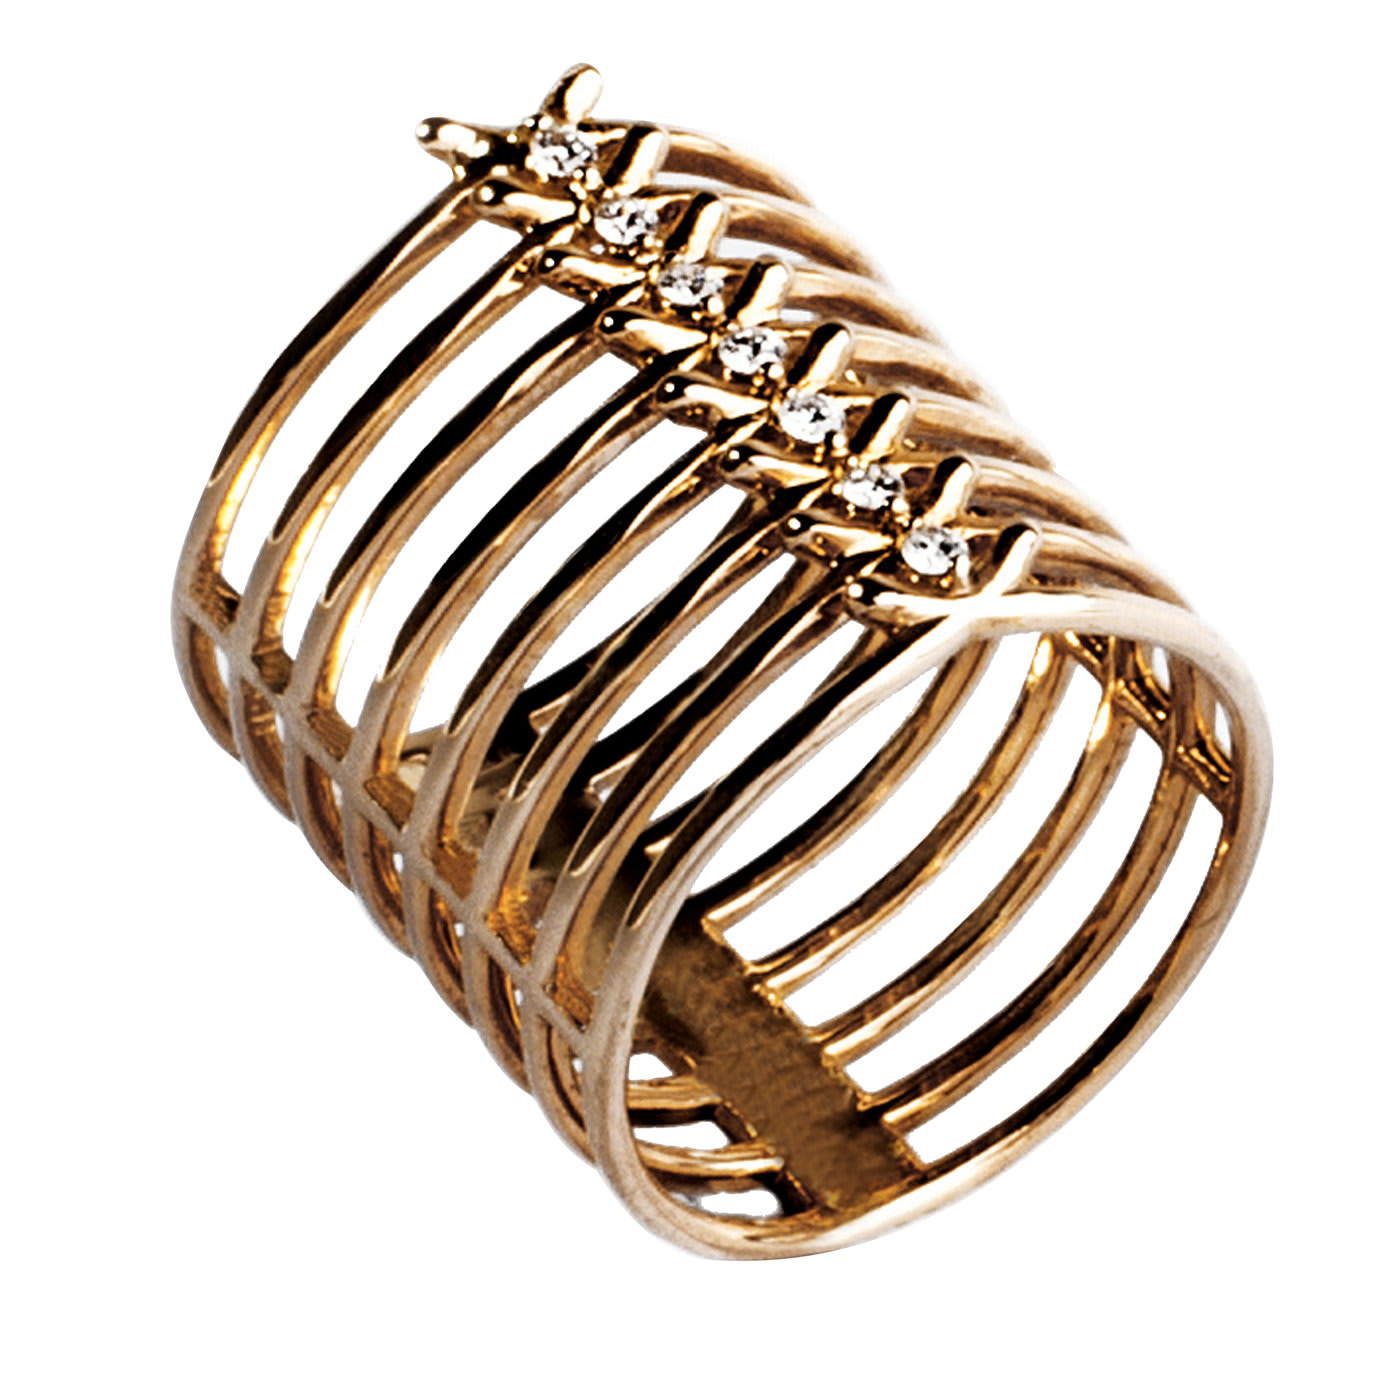 Spinae Eight-Element Ring - Paola Grande